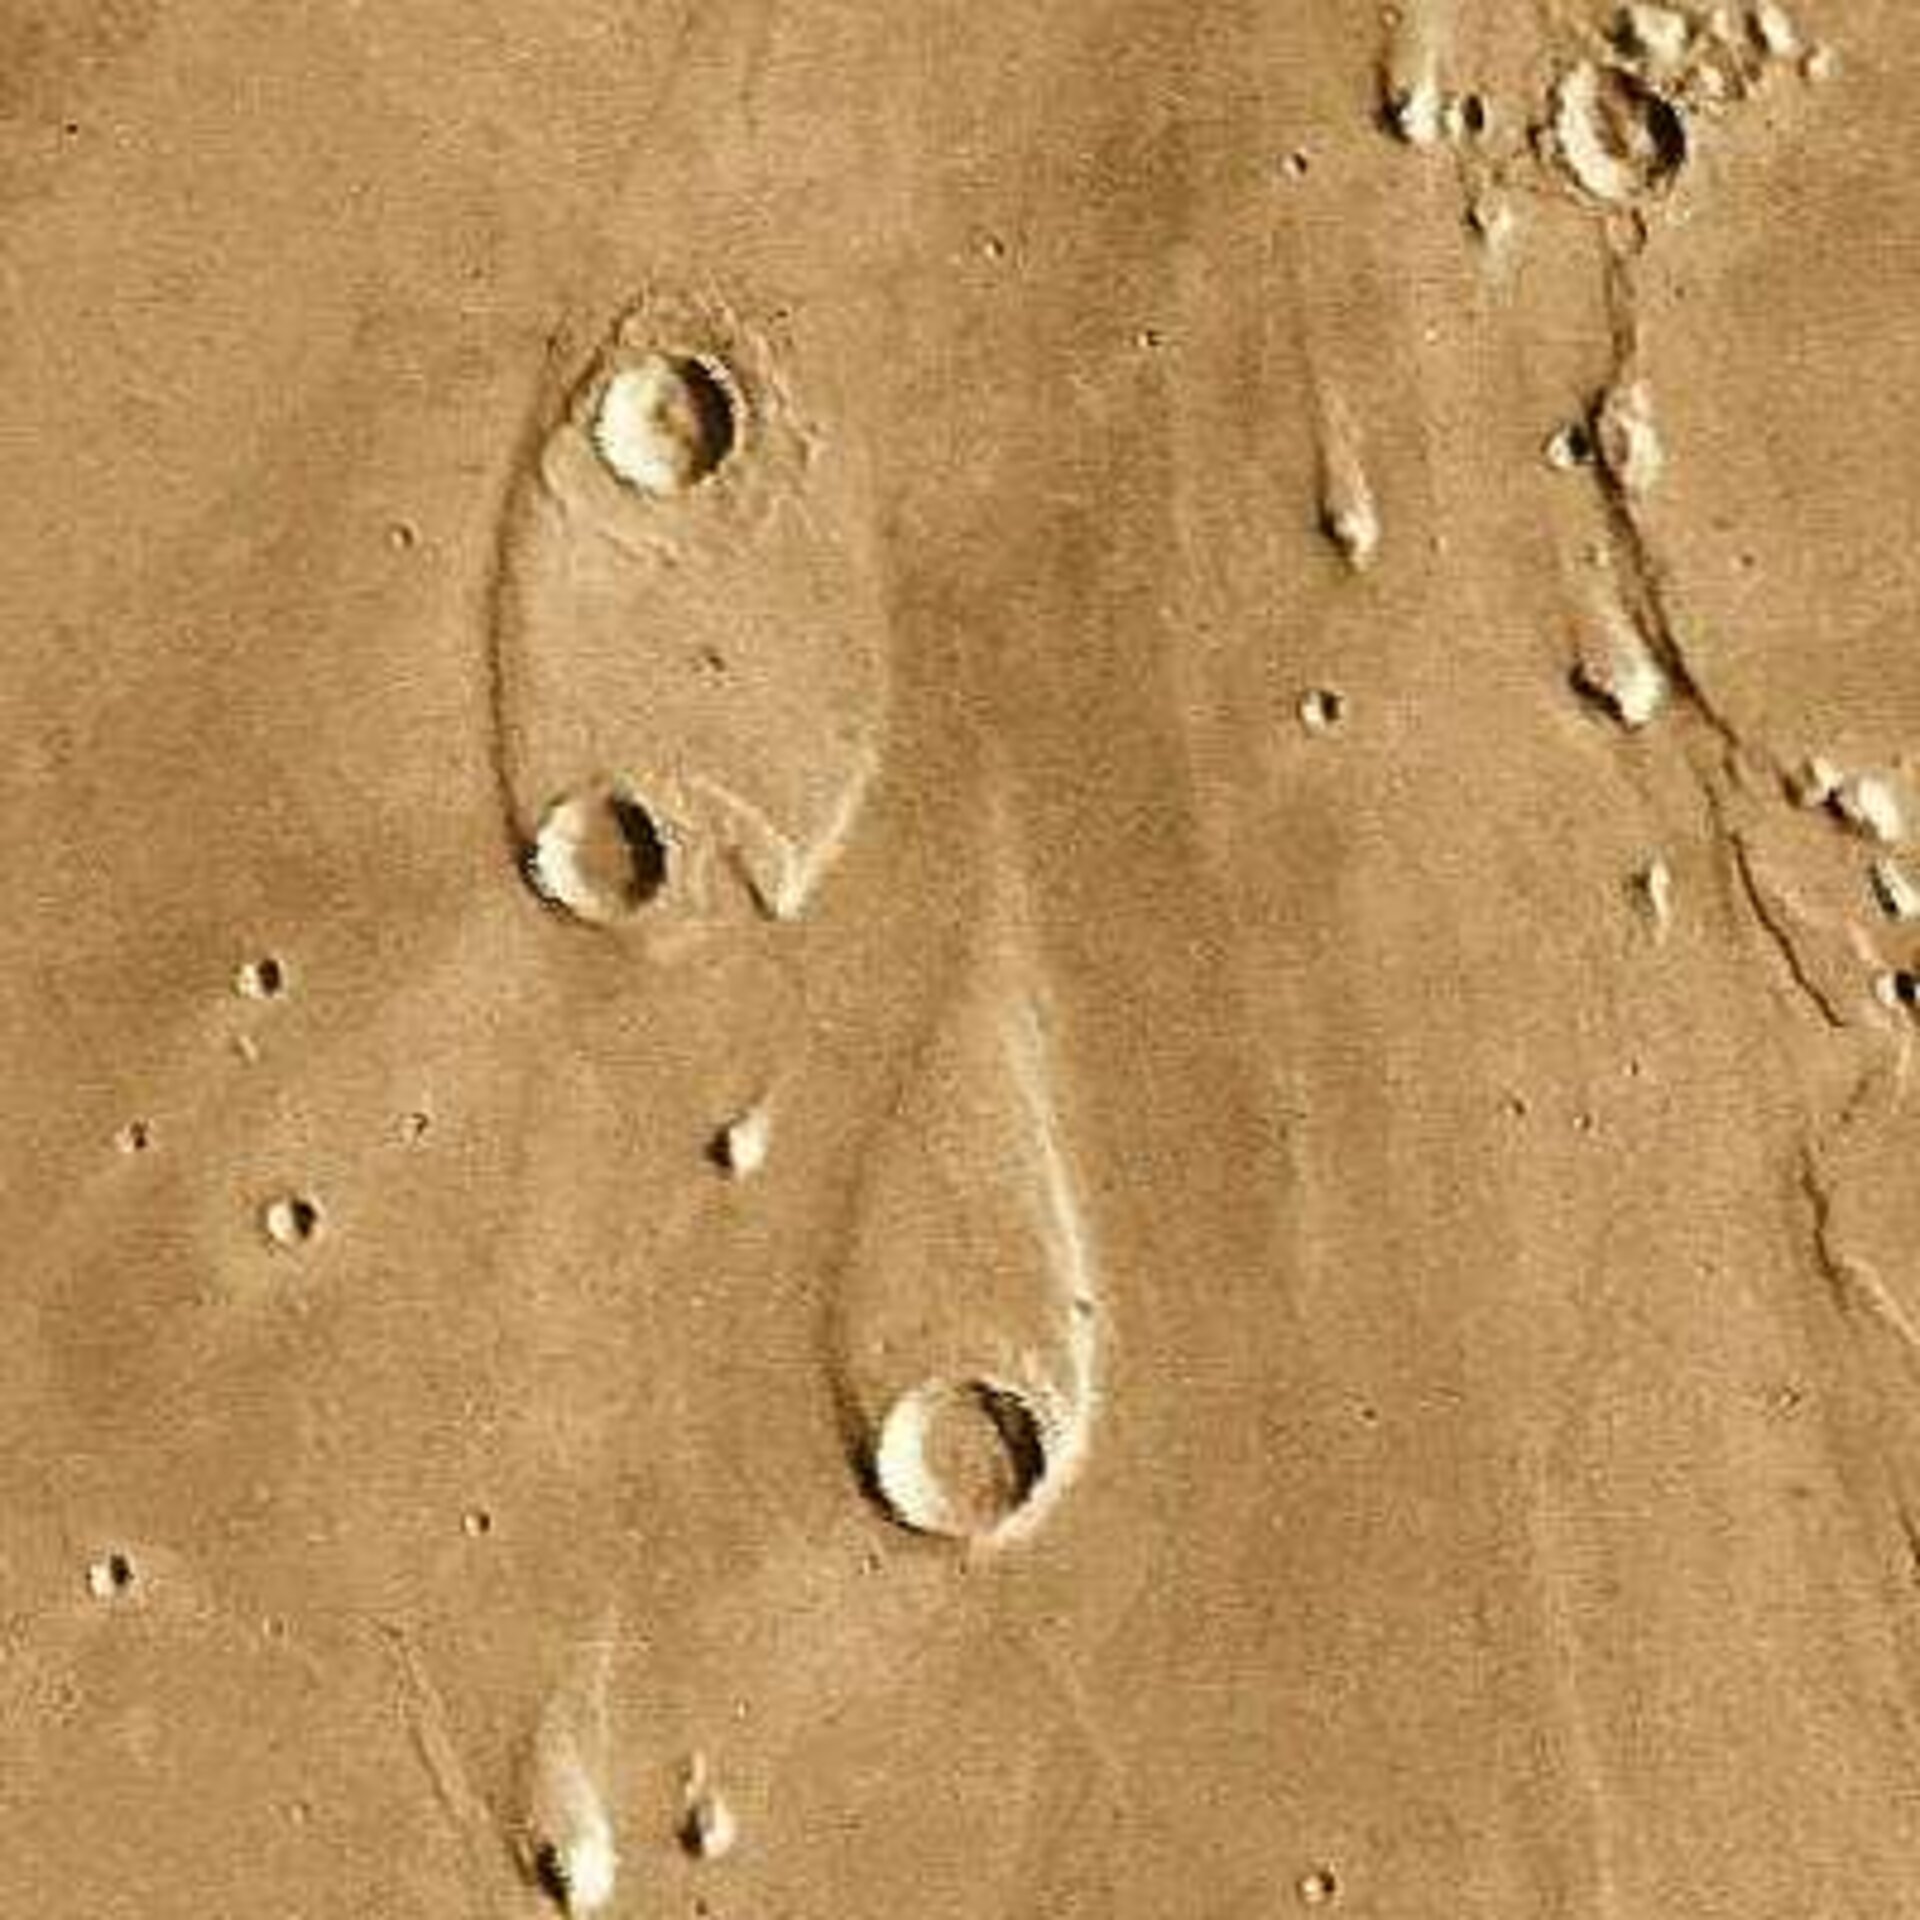 Water on Mars? - islands in the Chryse Basin